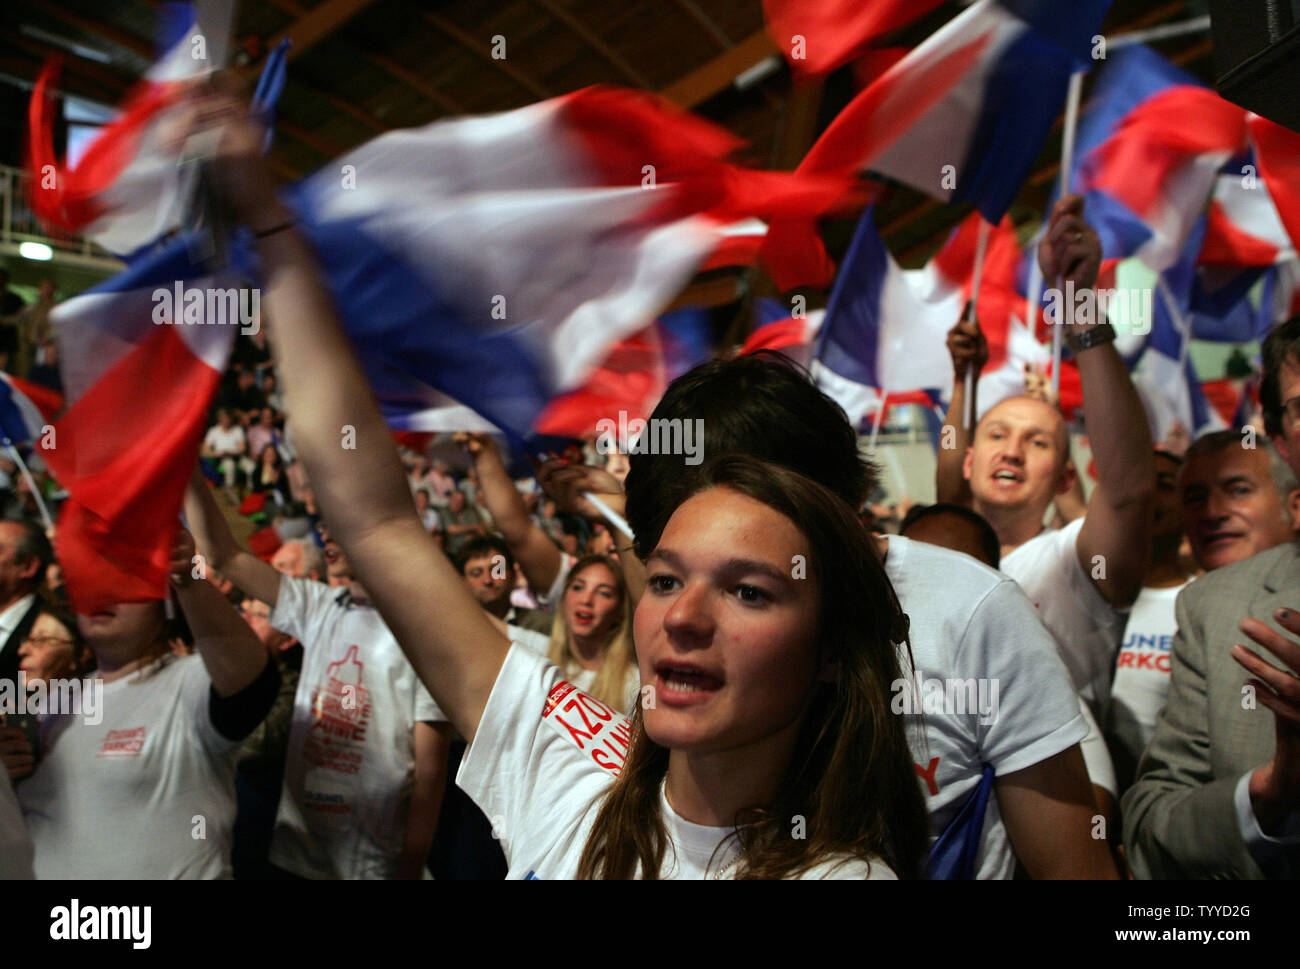 Youths wave the national flag as French President Nicolas Sarkozy campaigns at a public meeting on March 28, 2012 in Elancourt, near Paris, France. Polls showed that the conservative candidate has caught up with his Socialist challenger in the first round of a presidential election next month. UPI/Eco Clement Stock Photo